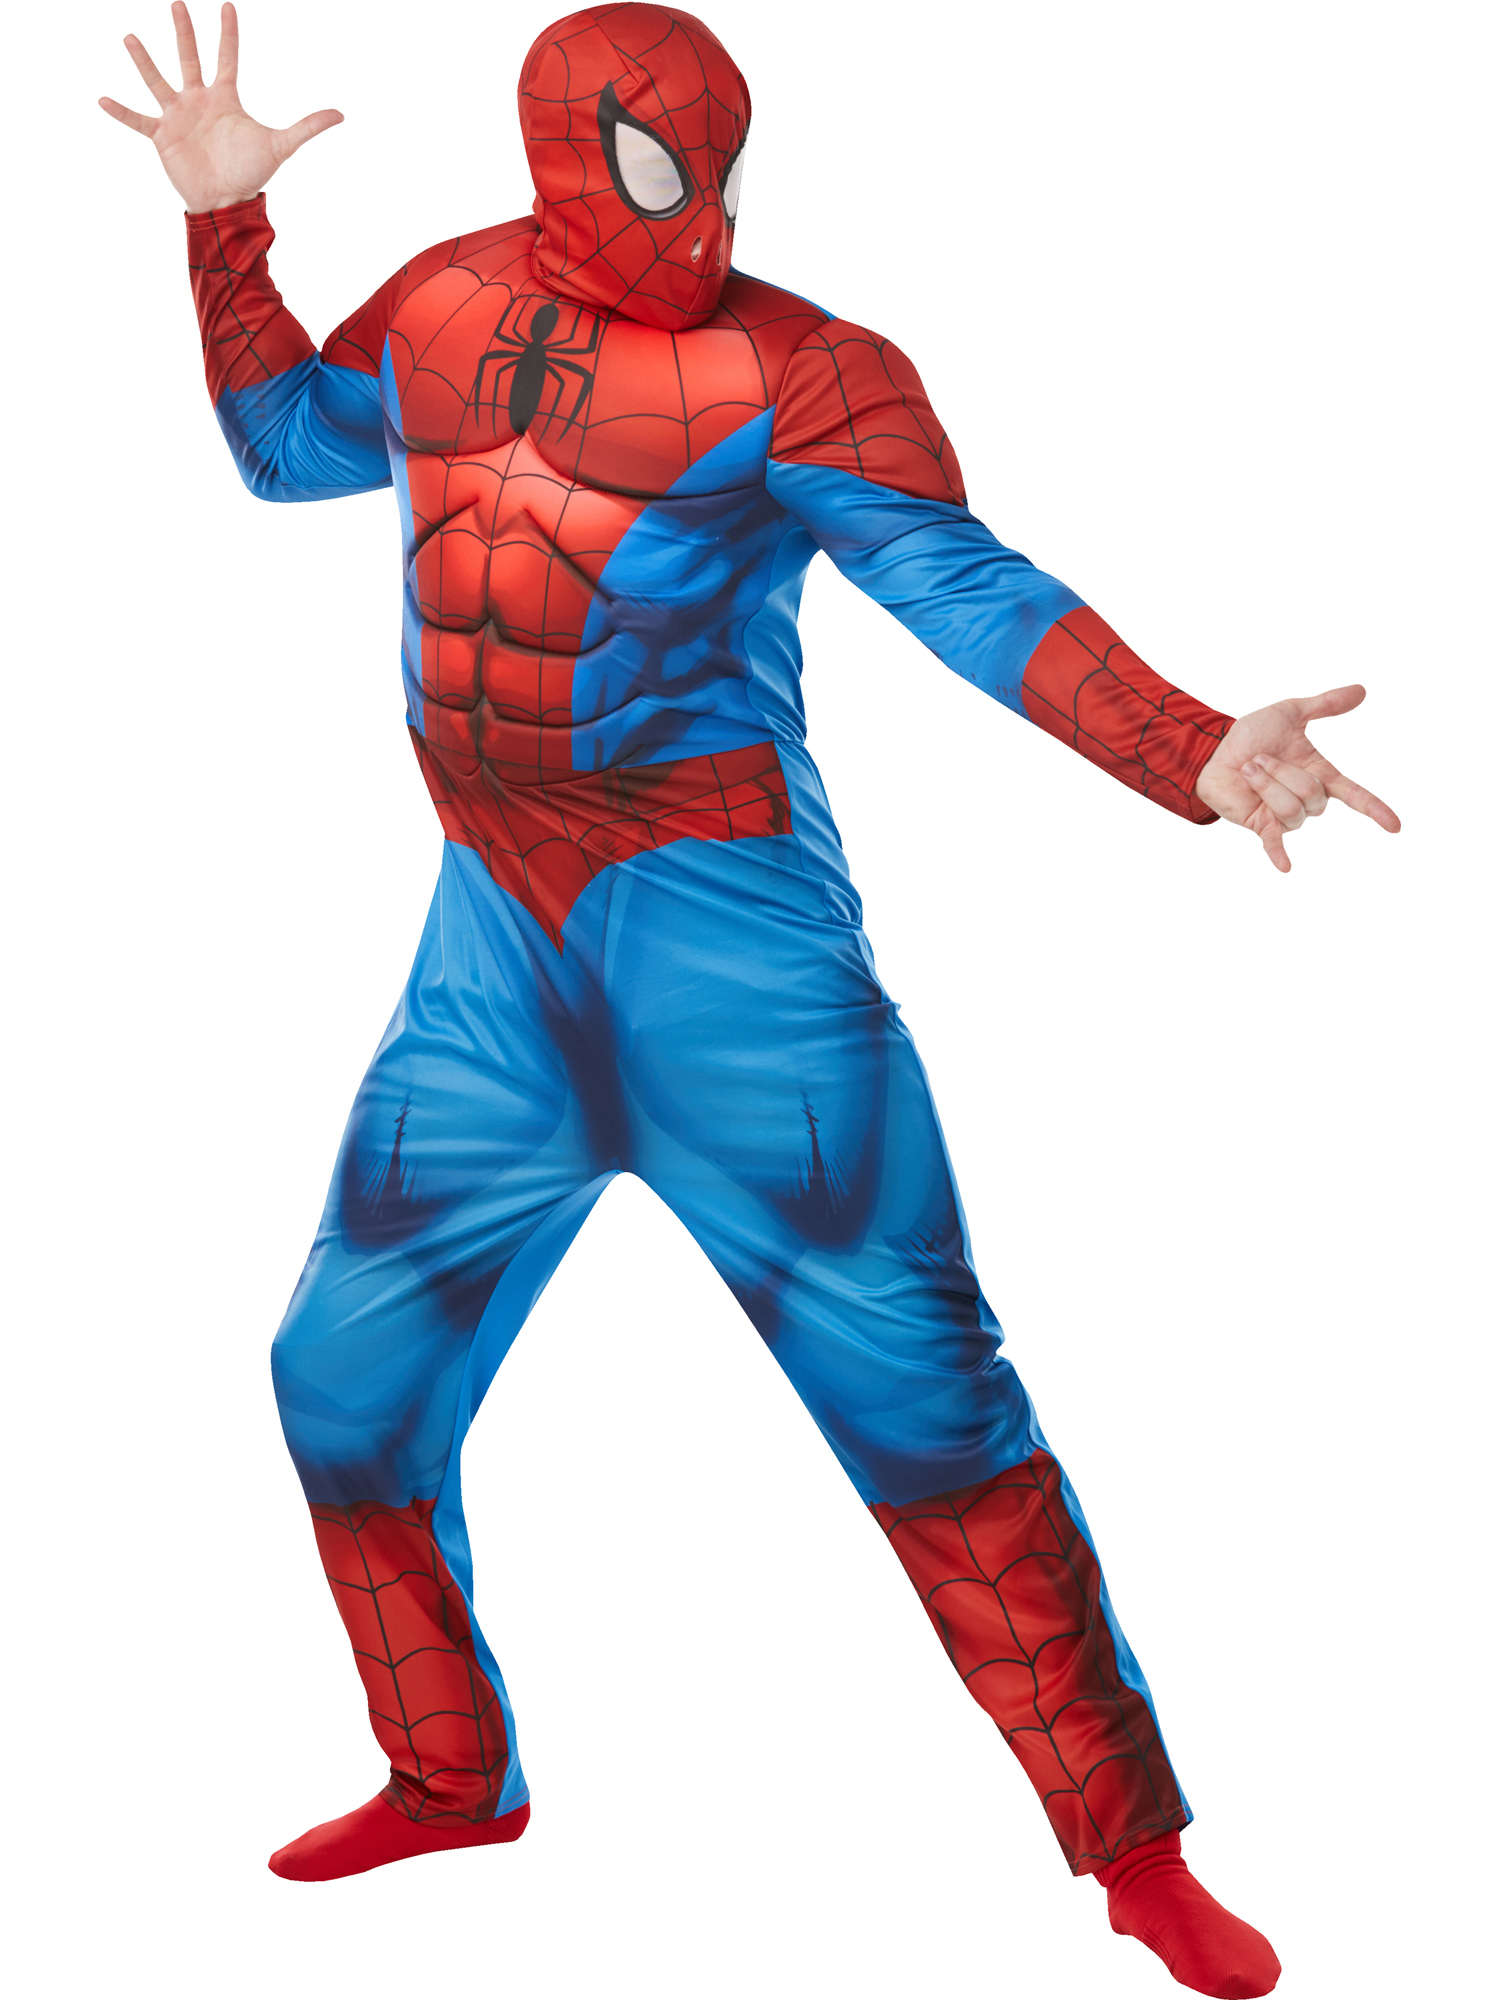 Spider-Man, Avengers, Multi, Marvel, Adult Costume, Extra Large, Front